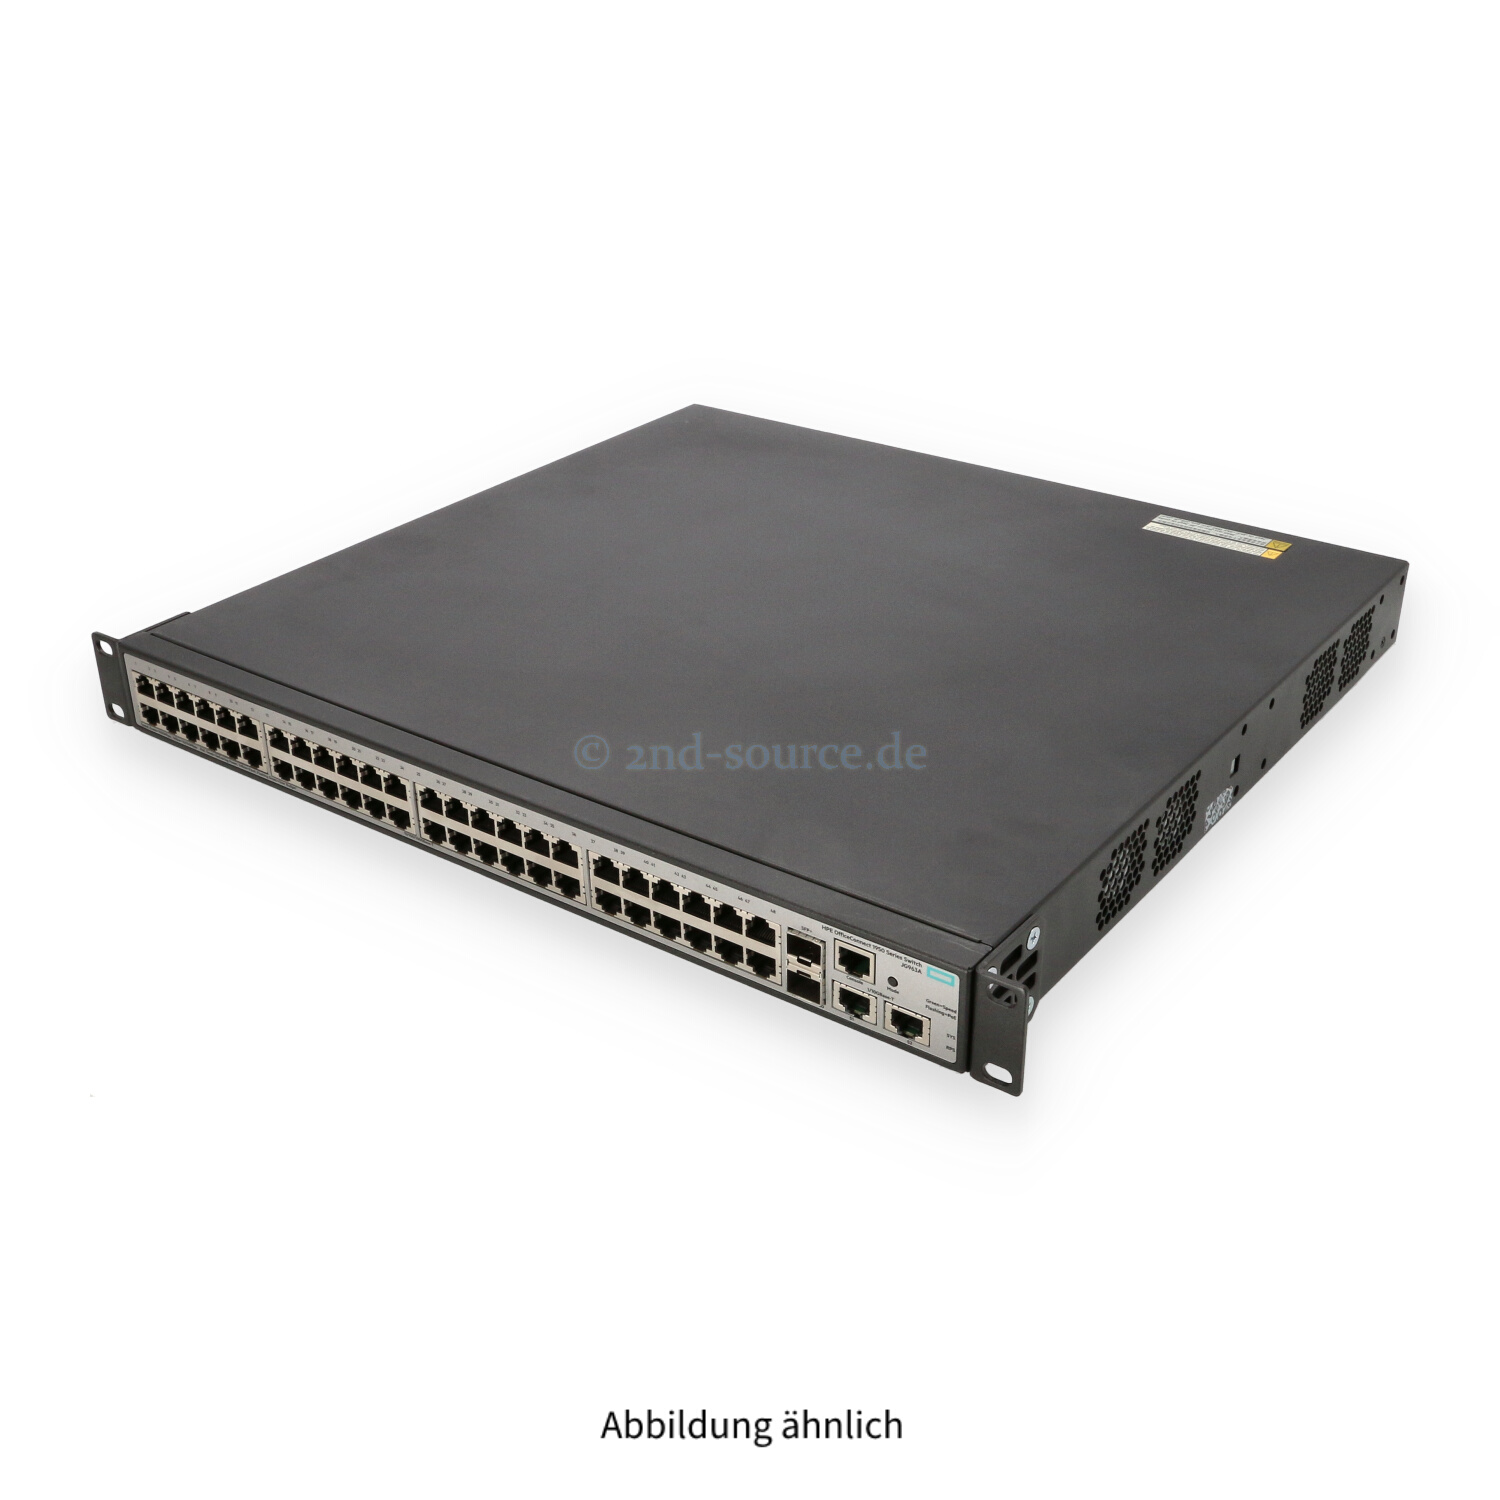 HPE OfficeConnect 1950-48G-2SFP+ 48x 1GbE PoE+ 2x 10GbE 2x SFP+ 10GbE Managed Switch JG963A JG963-61001 JG963-61101